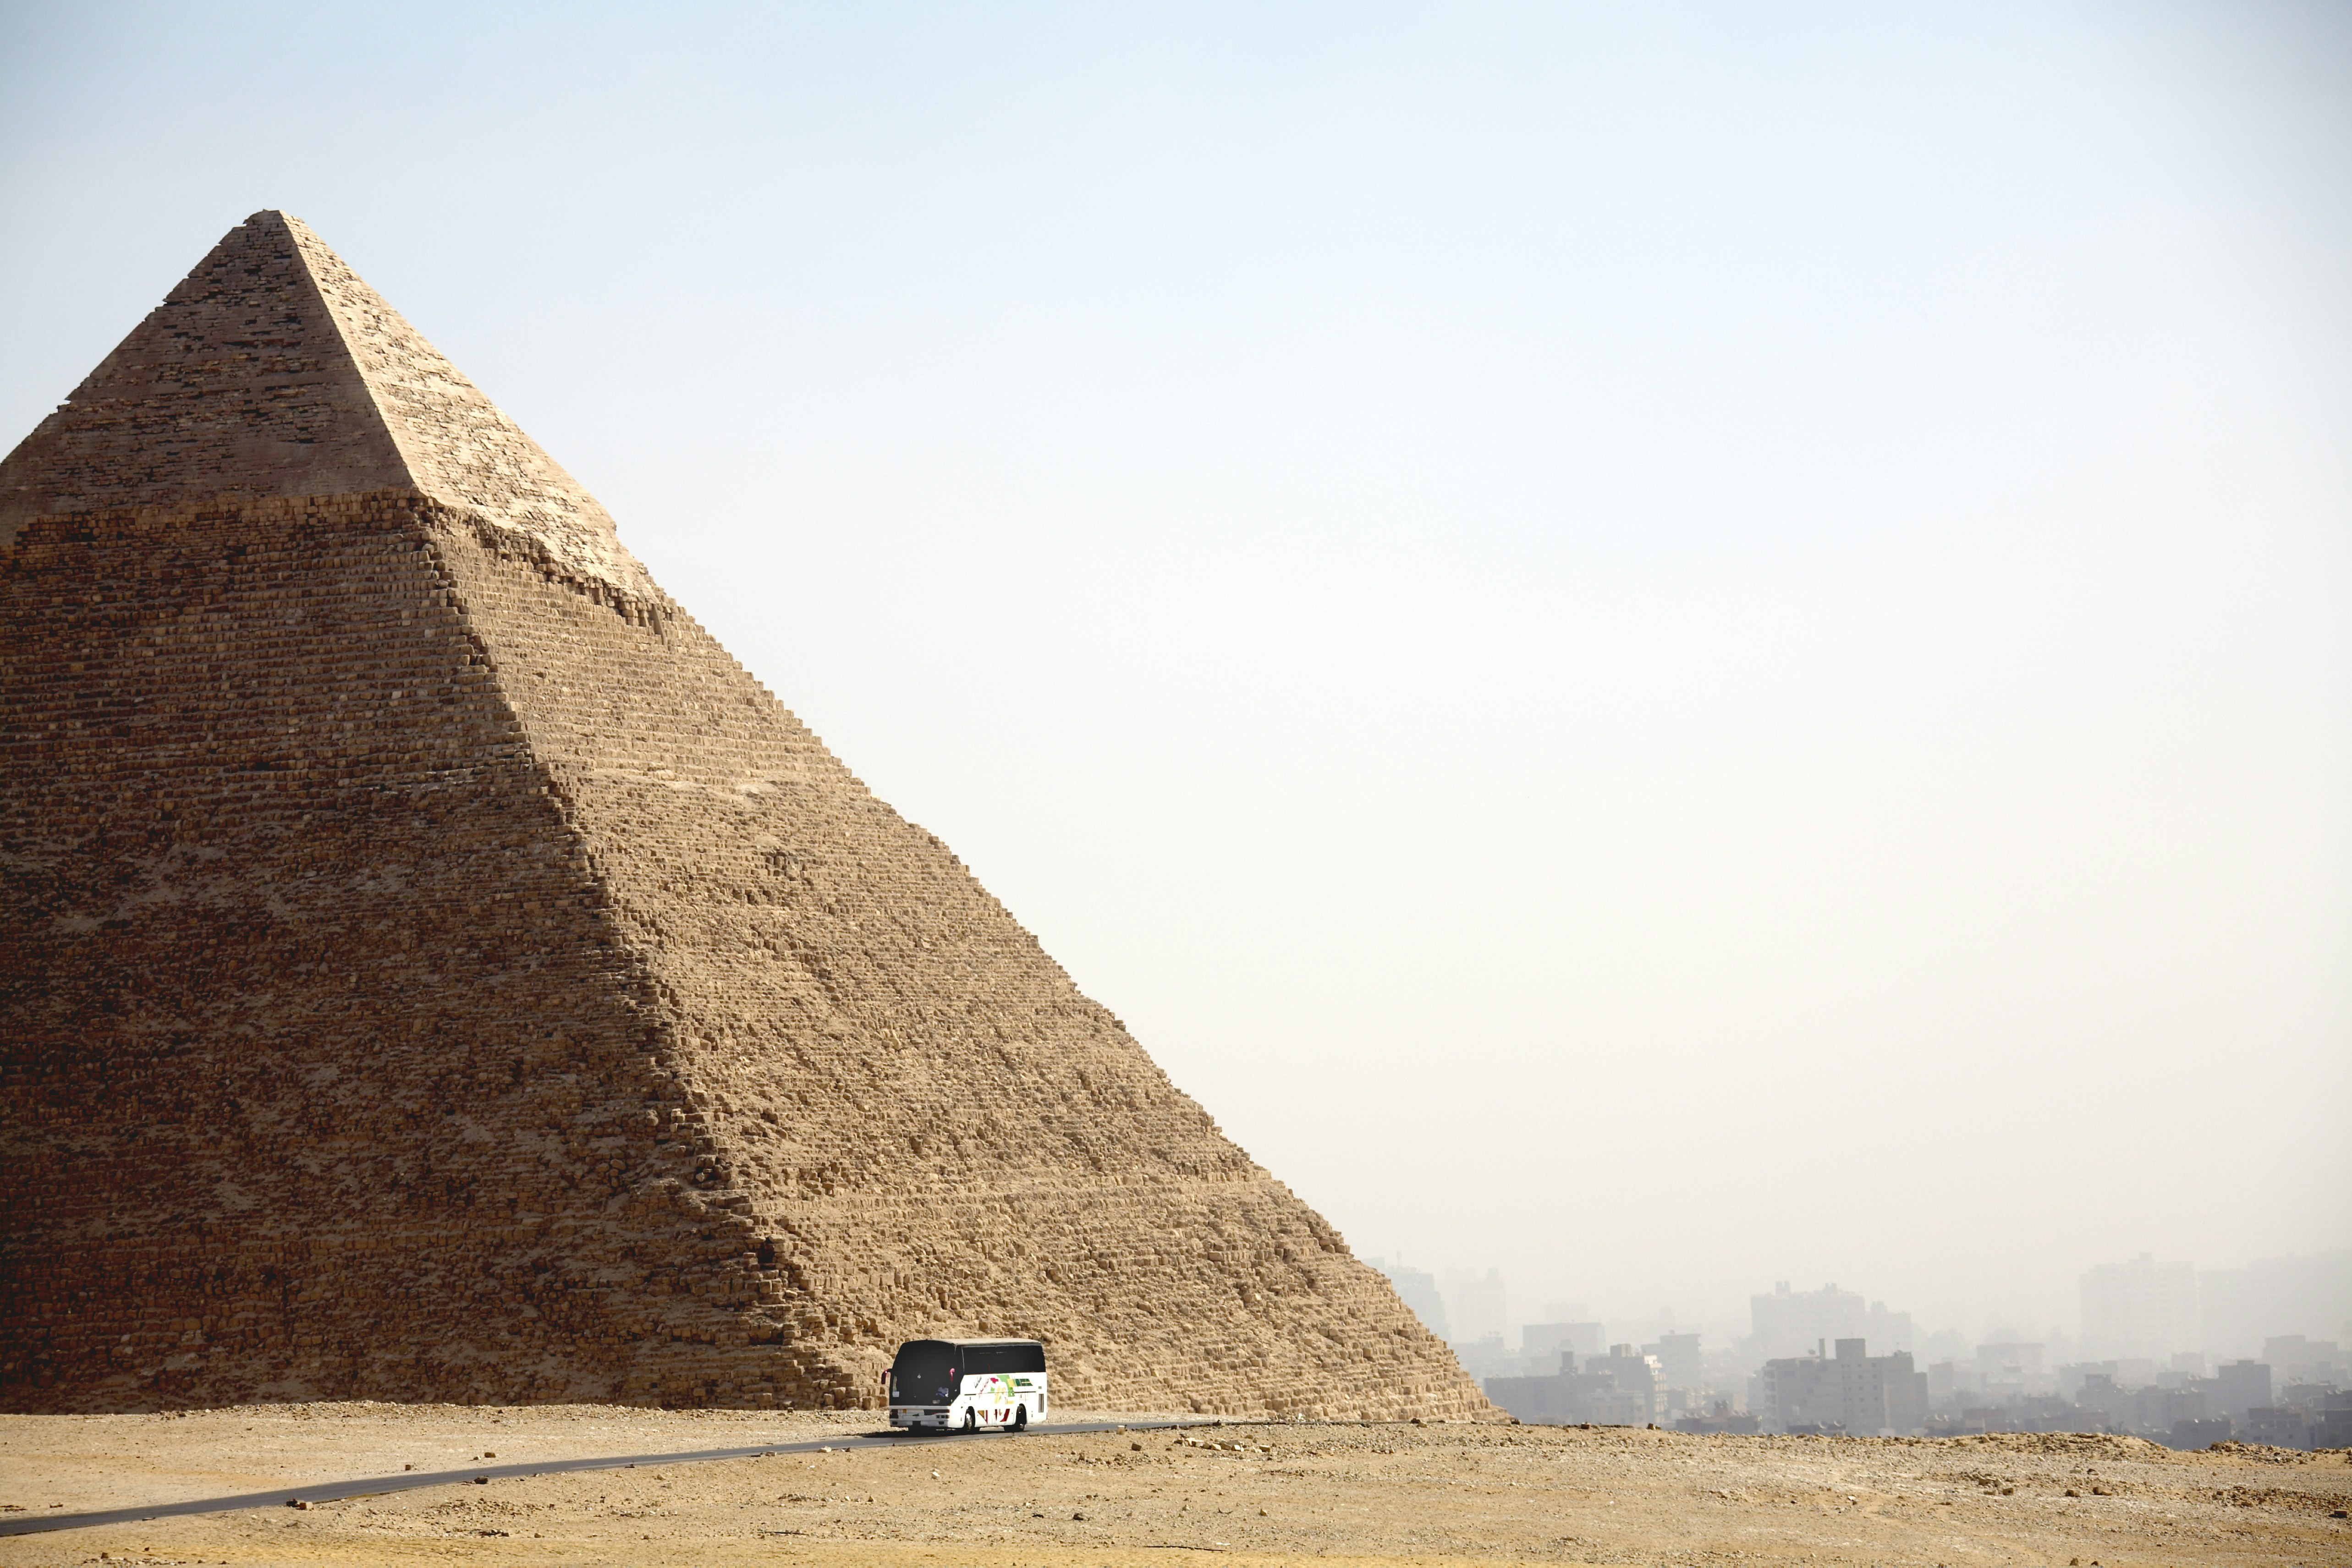 A coach bus drives past a large pyramid in Cairo, Egypt